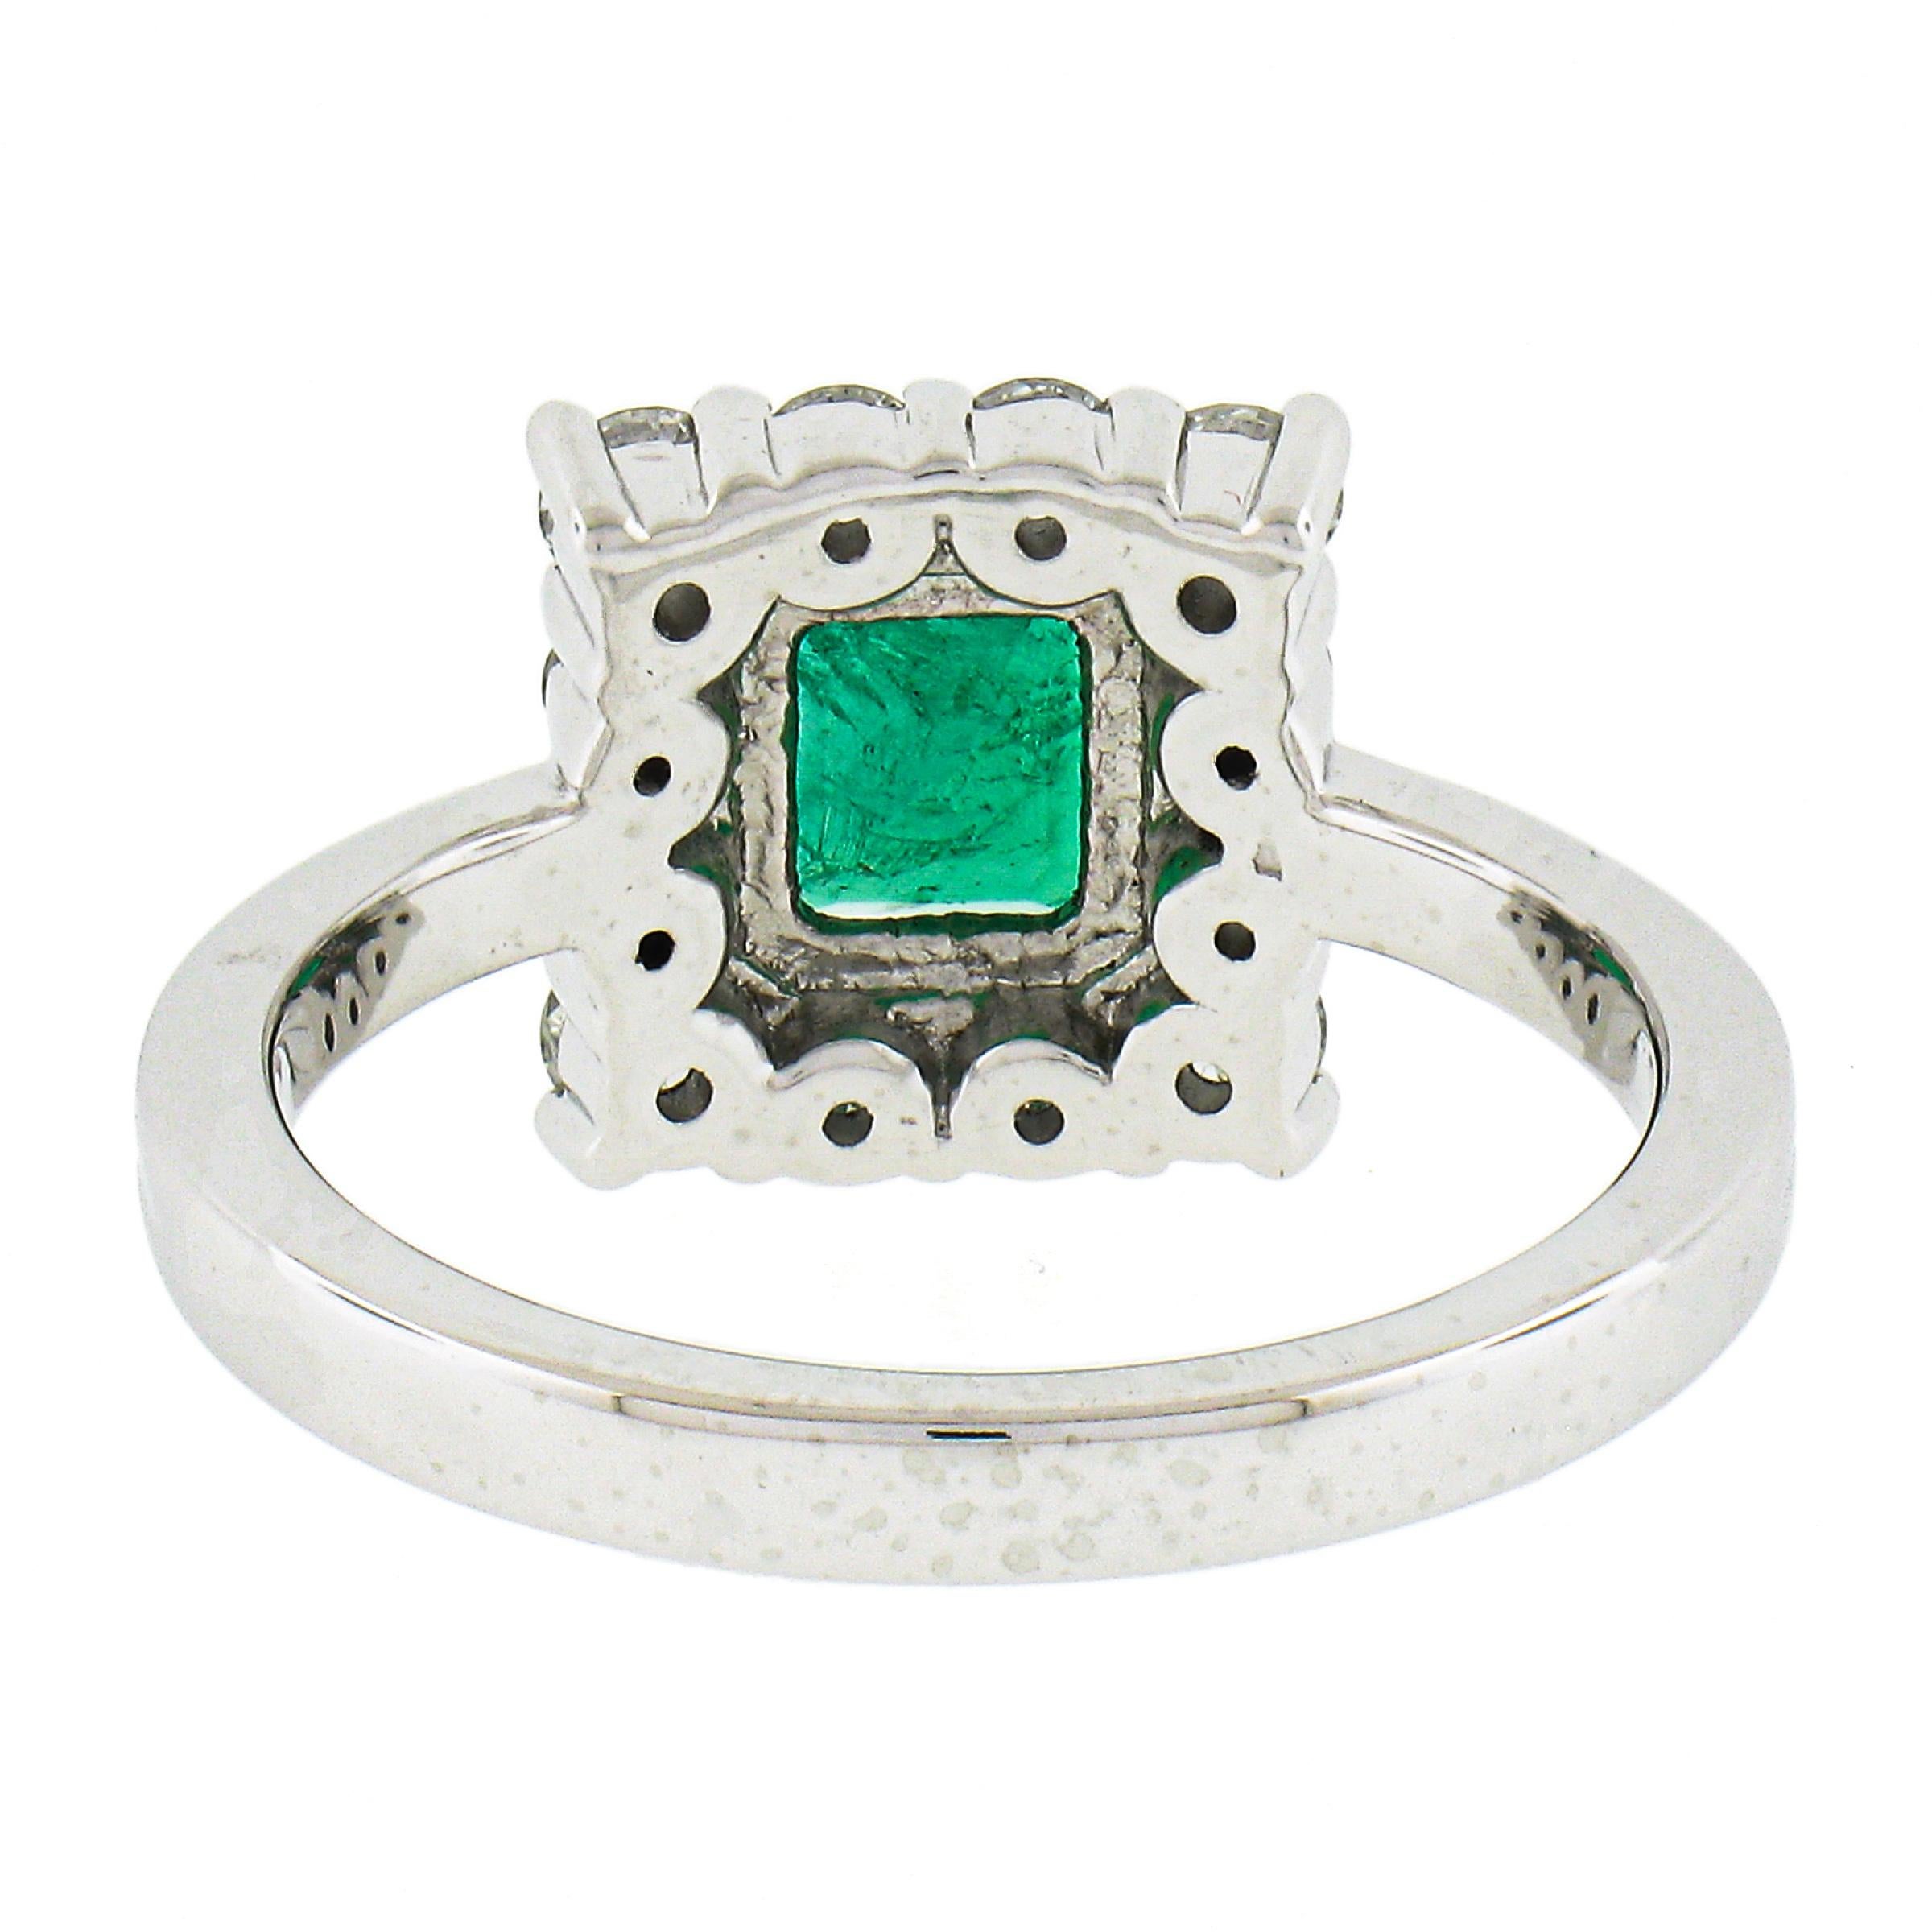 NEW Platinum 1.51ctw GIA Colombian Green Emerald w/ Diamond Halo Cocktail Ring For Sale 2